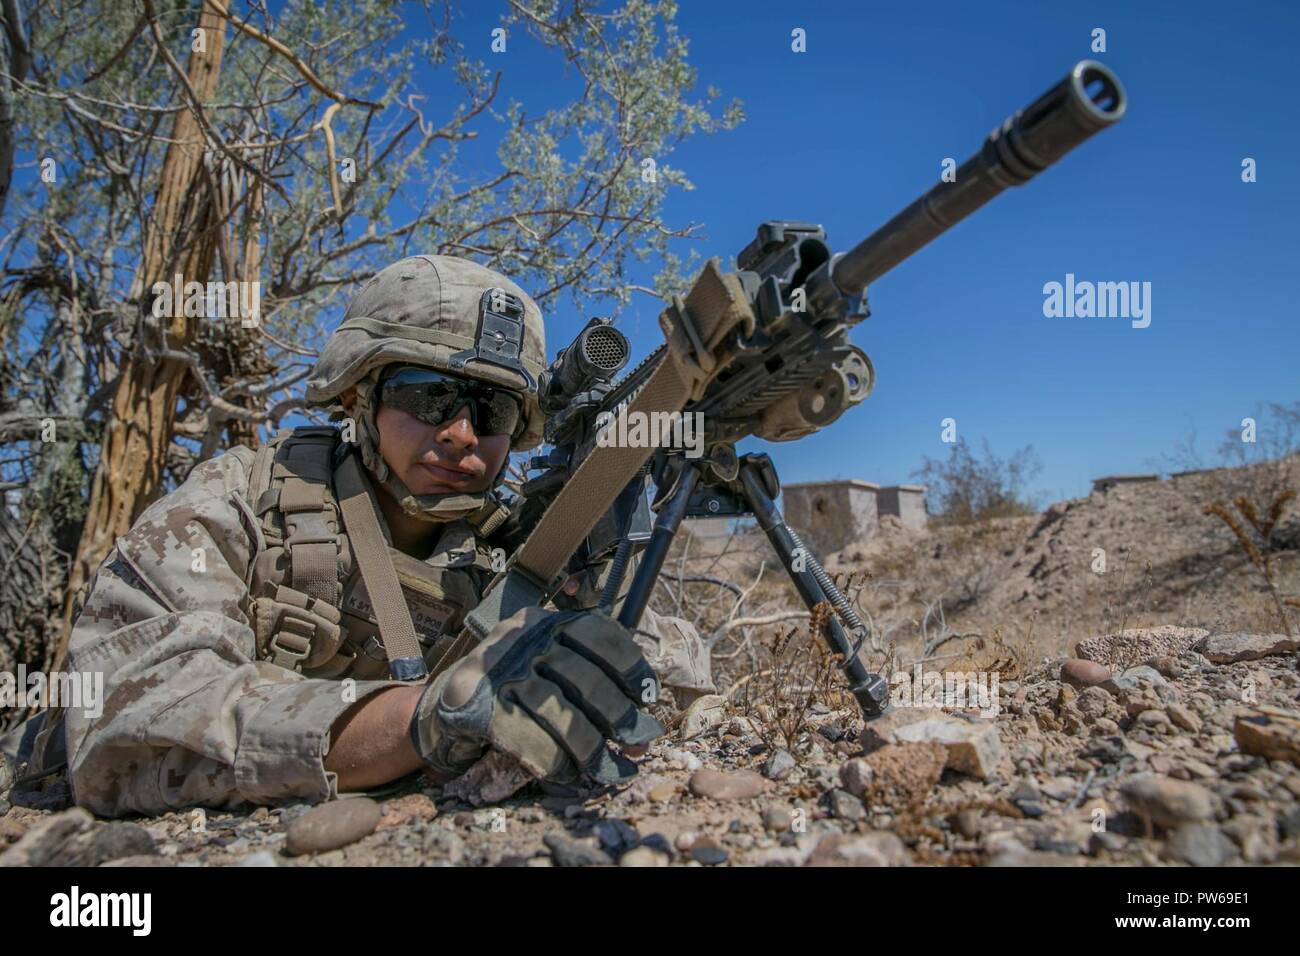 U.S. Marine Corps Lance Cpl. Alfredo Sandoval, an infantry Marine with Kilo Company, 3rd Battalion, 1st Marines, holds security for a rehearsal raid during Weapons and Tactics Instructors Course (WTI) 1-18 at Yuma, Ariz., on Sept. 27, 2017. WTI is a seven week training event hosted by Marine Aviation and Weapons Tactics Squadron One (MAWTS-1) cadre which emphasizes operational integration of the six functions of Marine Corps Aviation in support of a Marine Air Ground Task Force. MAWTS-1 provides standardized advanced tactical training and certification of unit instructor qualifications to supp Stock Photo